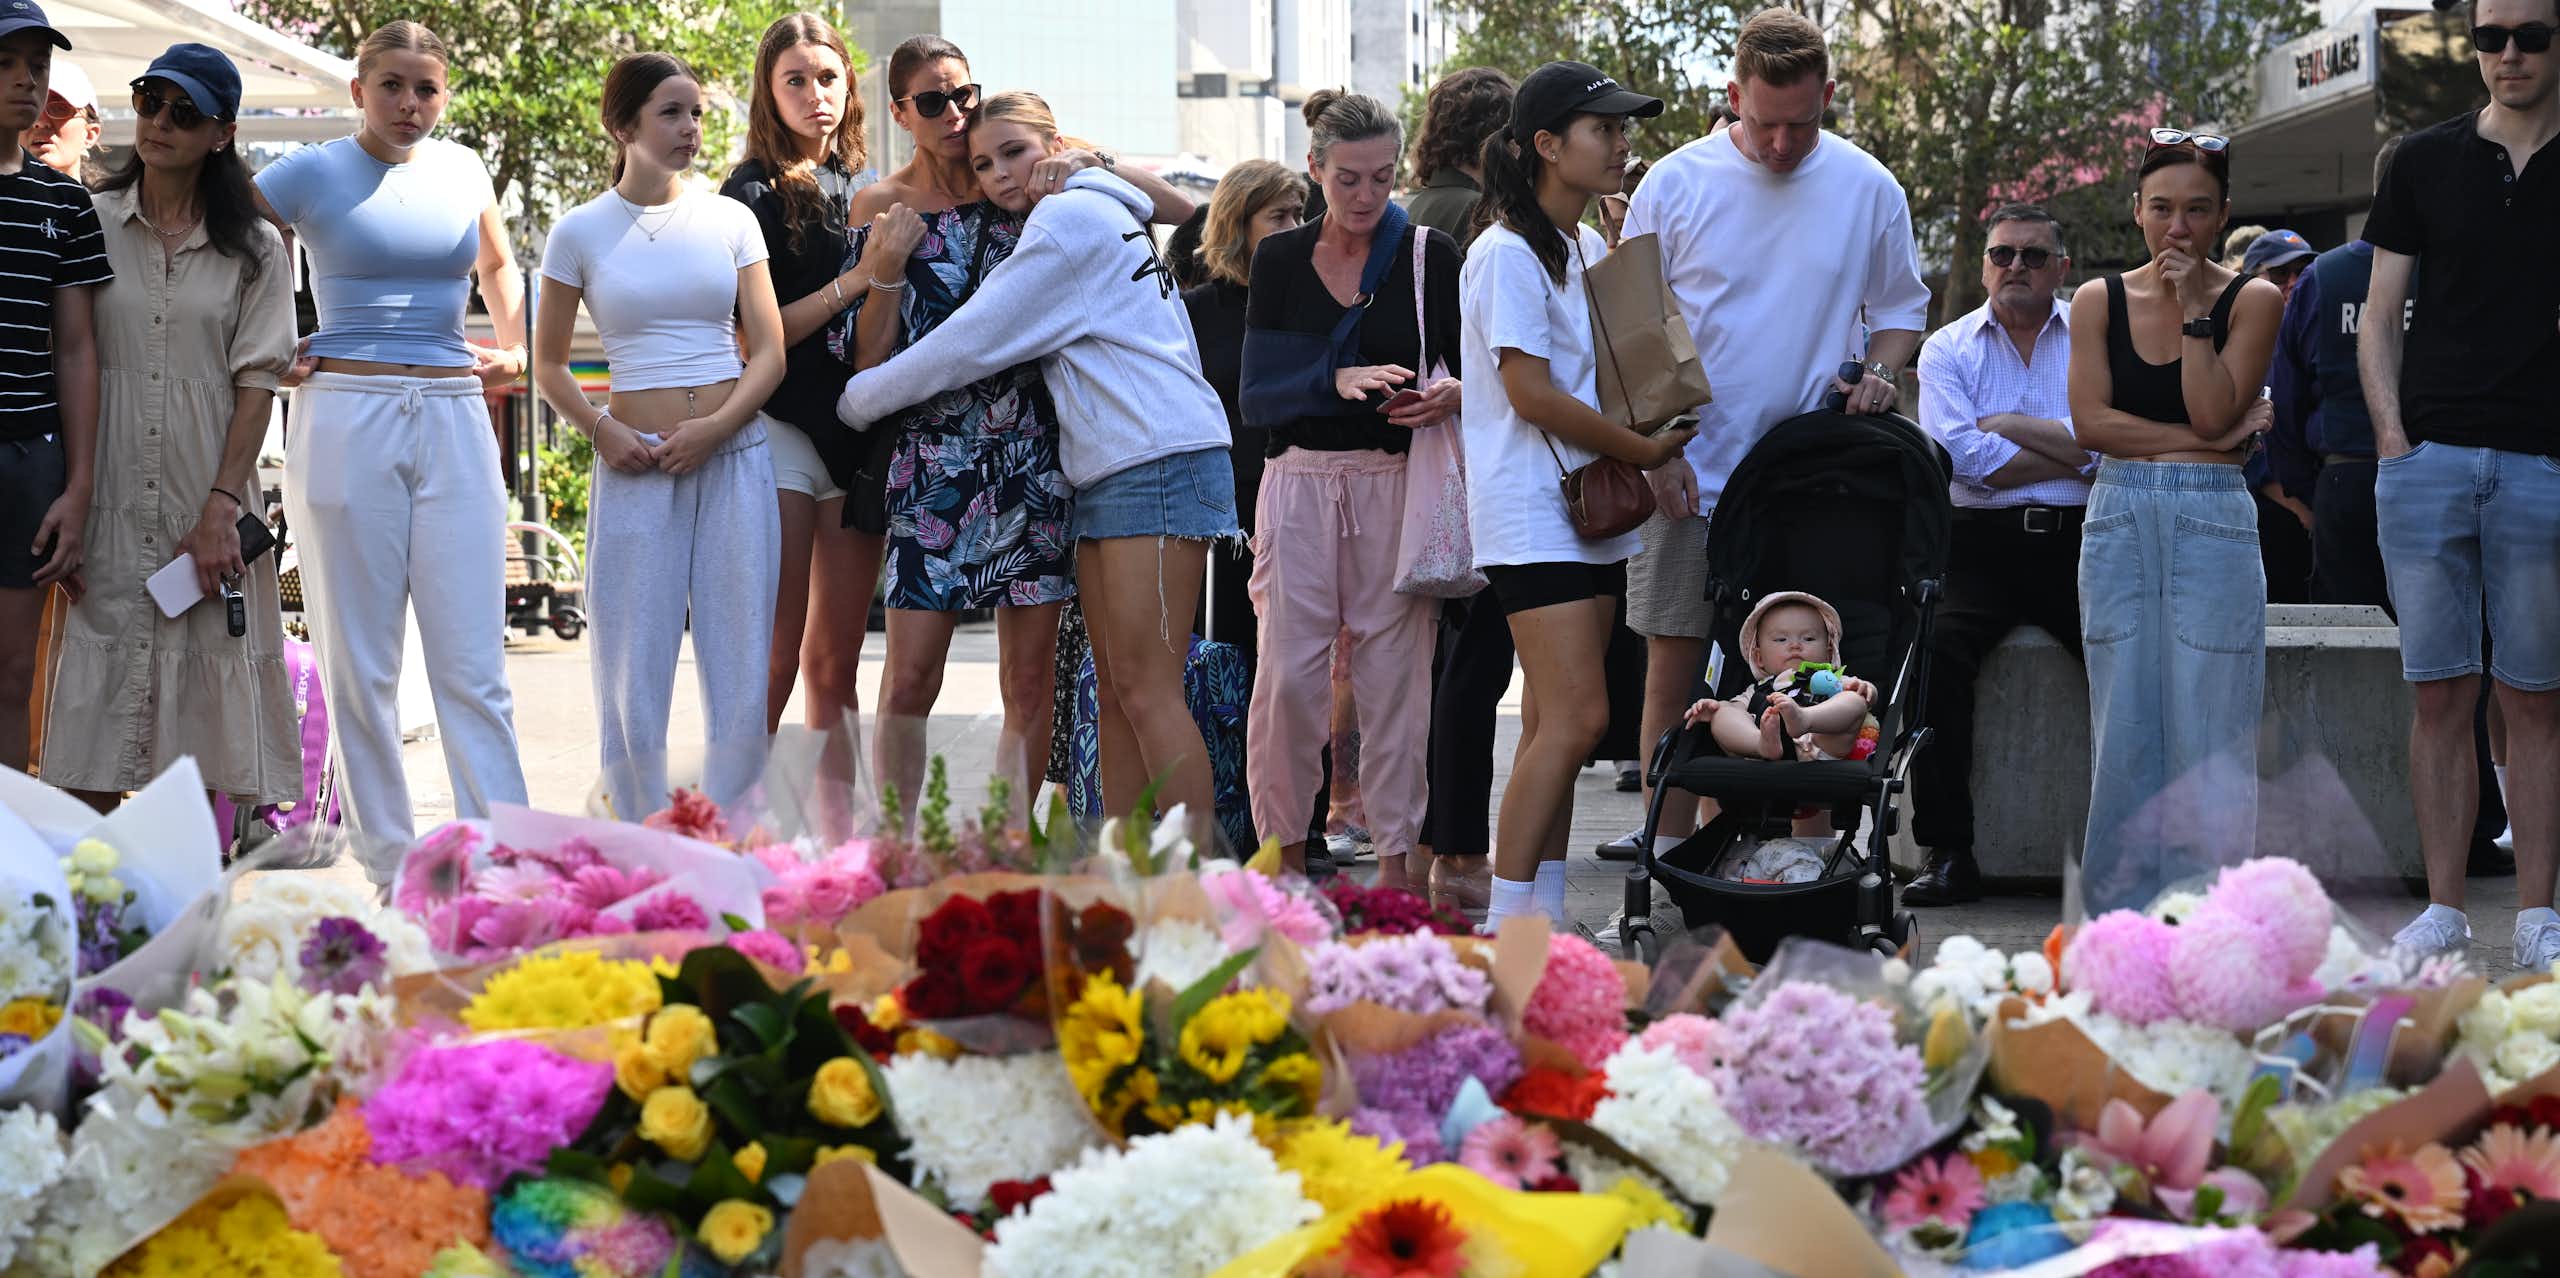 As Australia reels from the Bondi attack, such mass murder incidents remain rare